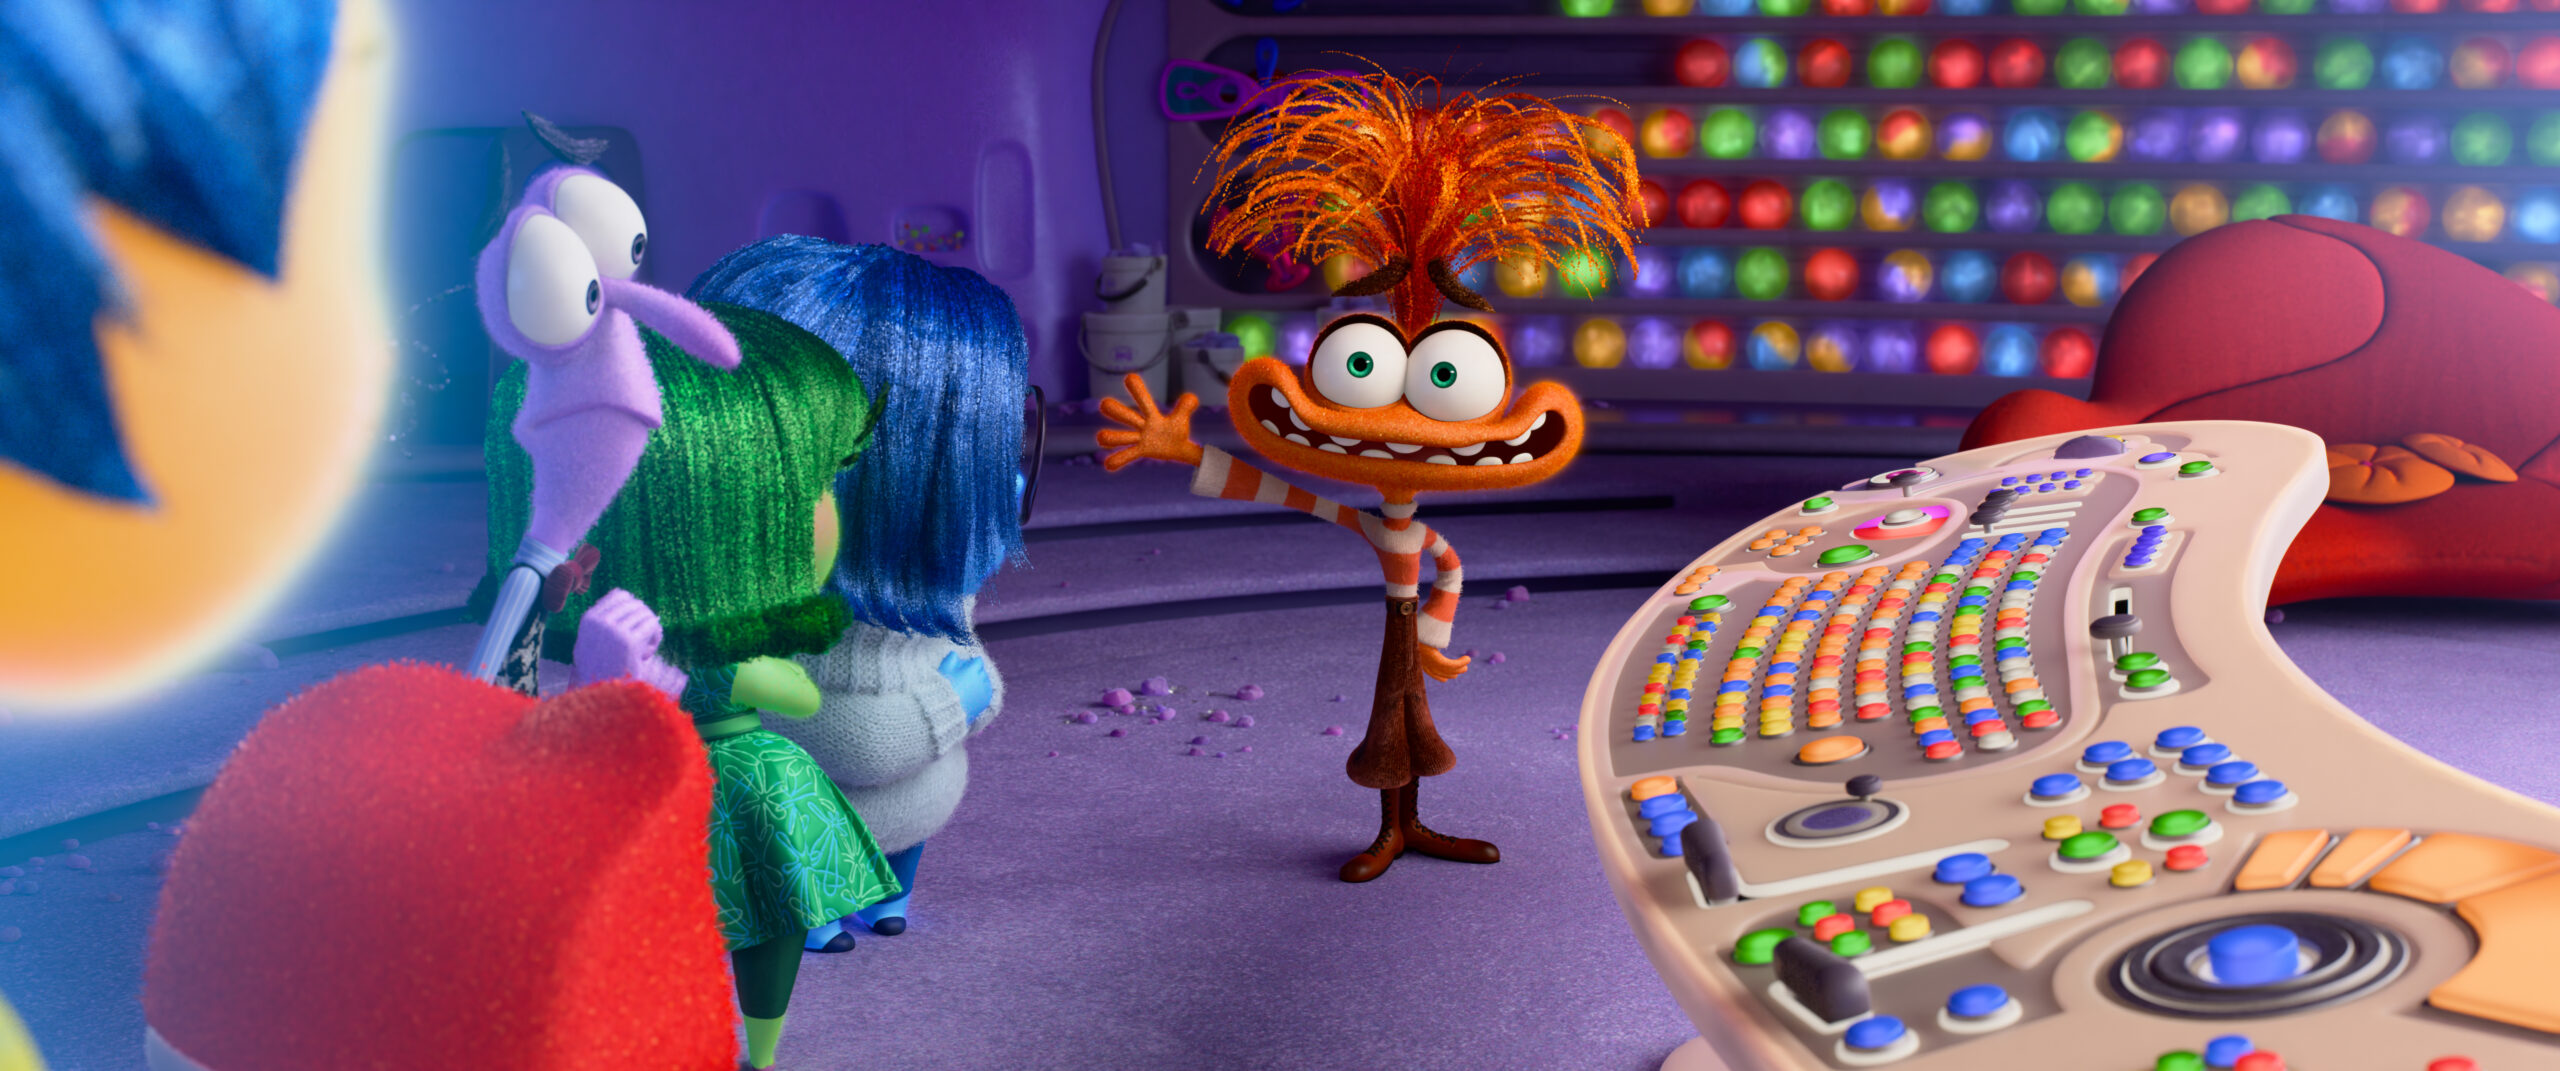 Pixar And Disney Unveil Record-Breaking Inside Out 2 Trailer, Introducing New Emotion